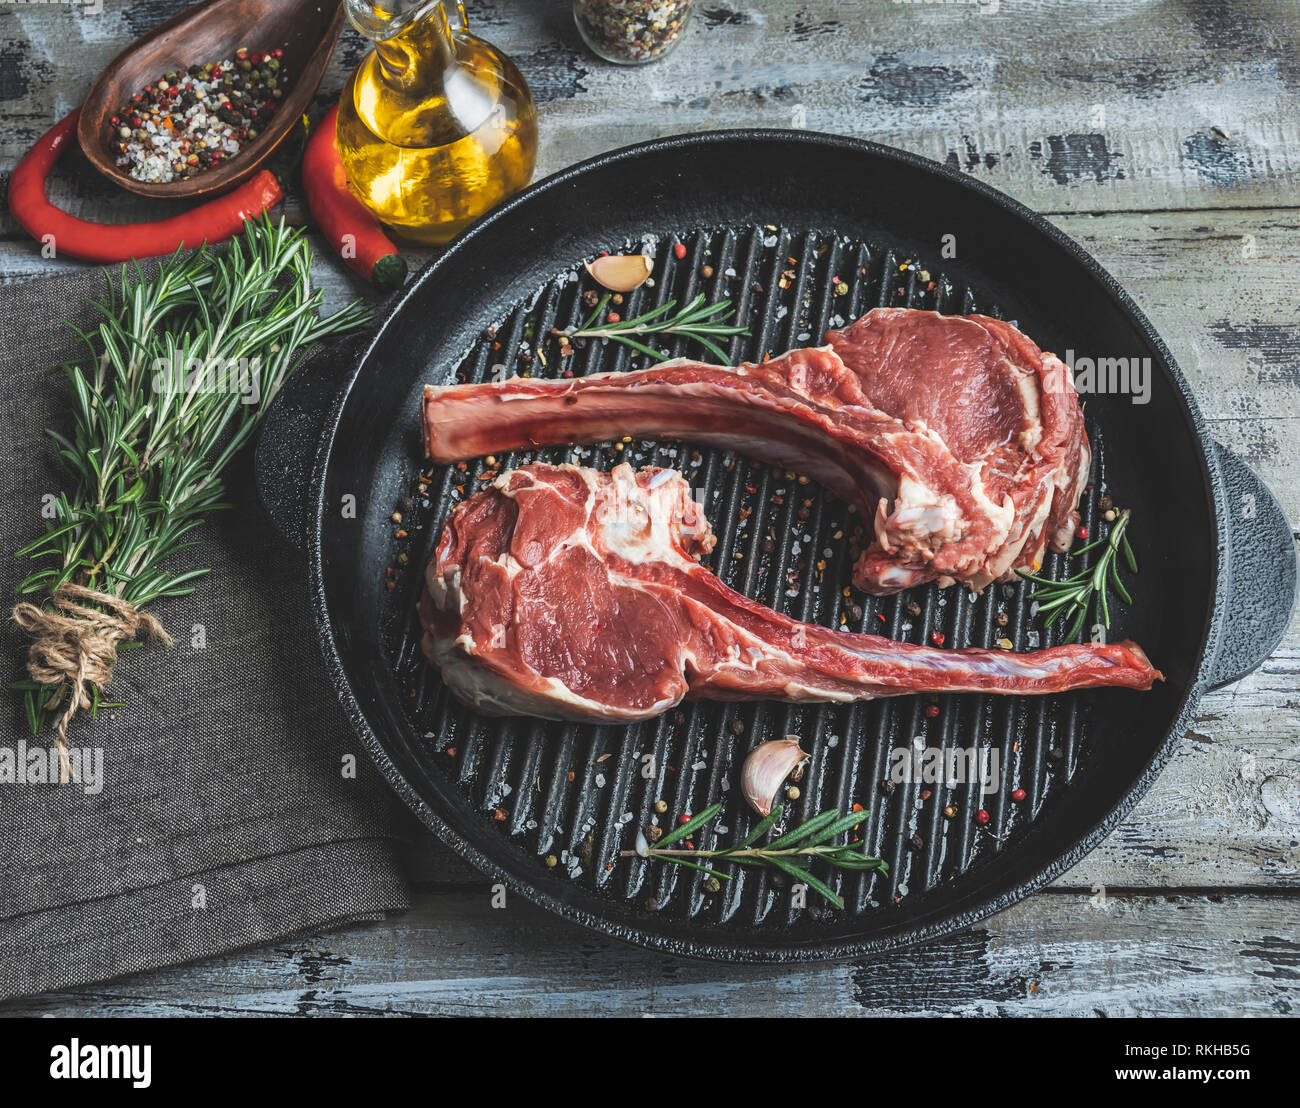 Raw meat lamb veal ribs loin on the grill pan, spices , chops ready for cooking Stock Photo